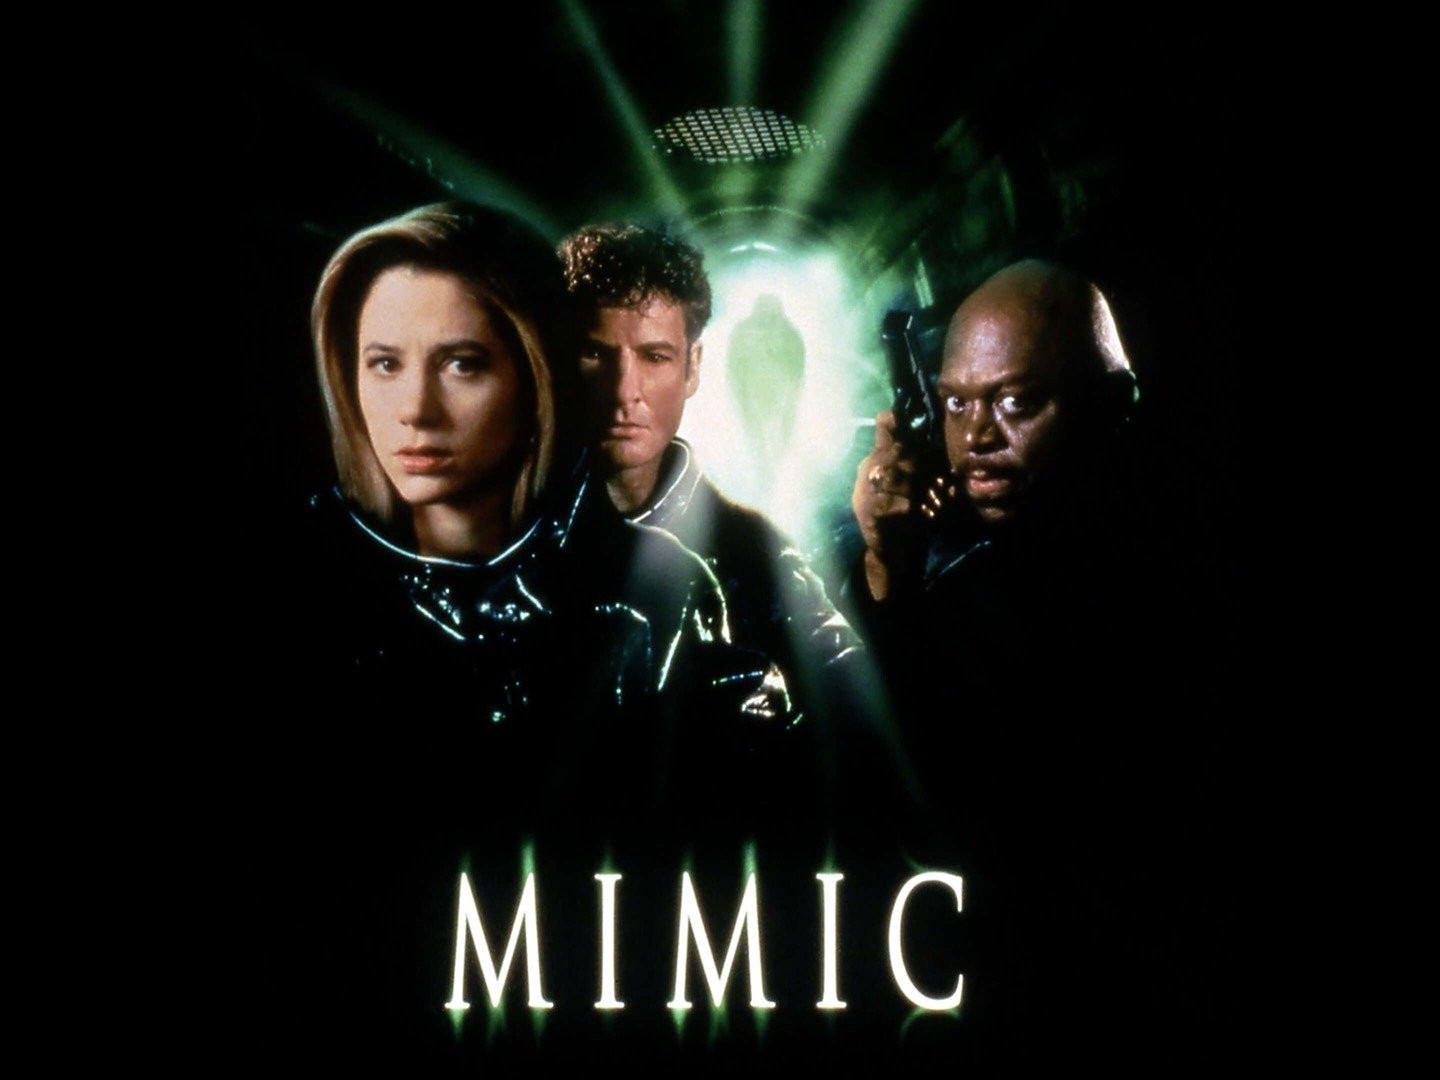 The Mimic Movie Review